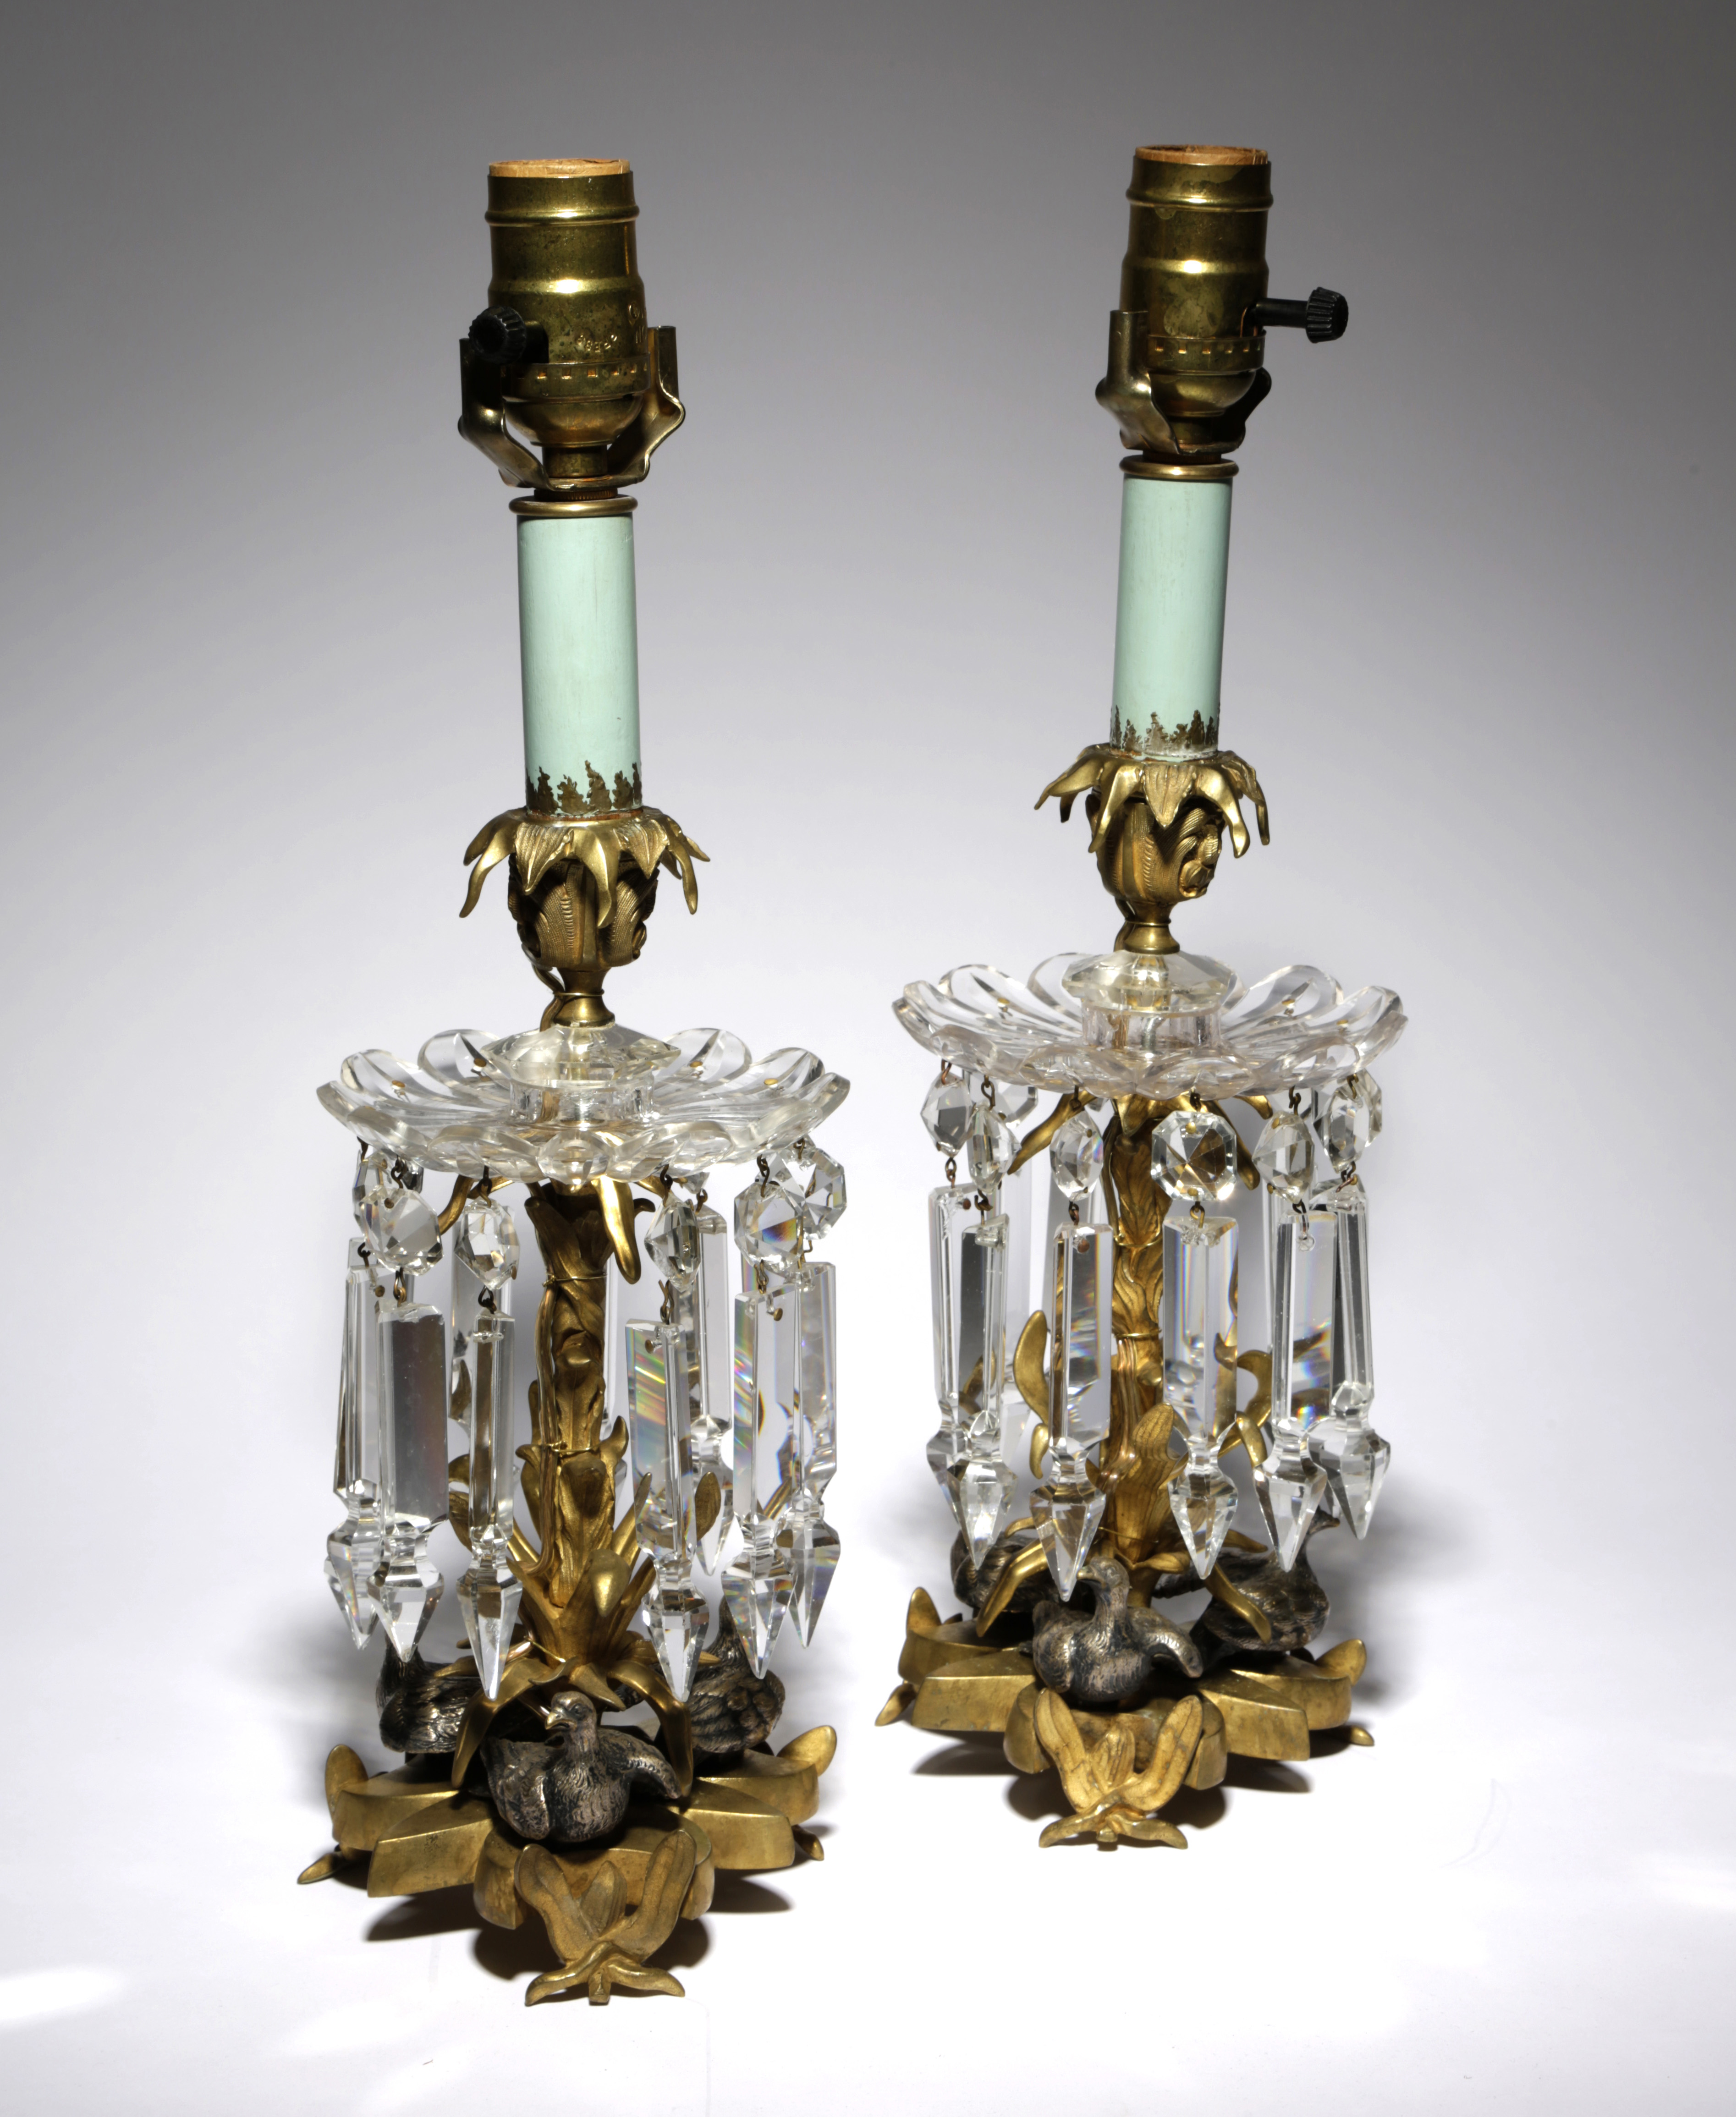 A PAIR OF FRENCH GILT BRONZE LUSTRE CANDLESTICKS 19TH CENTURY each with a glass drip-tray and